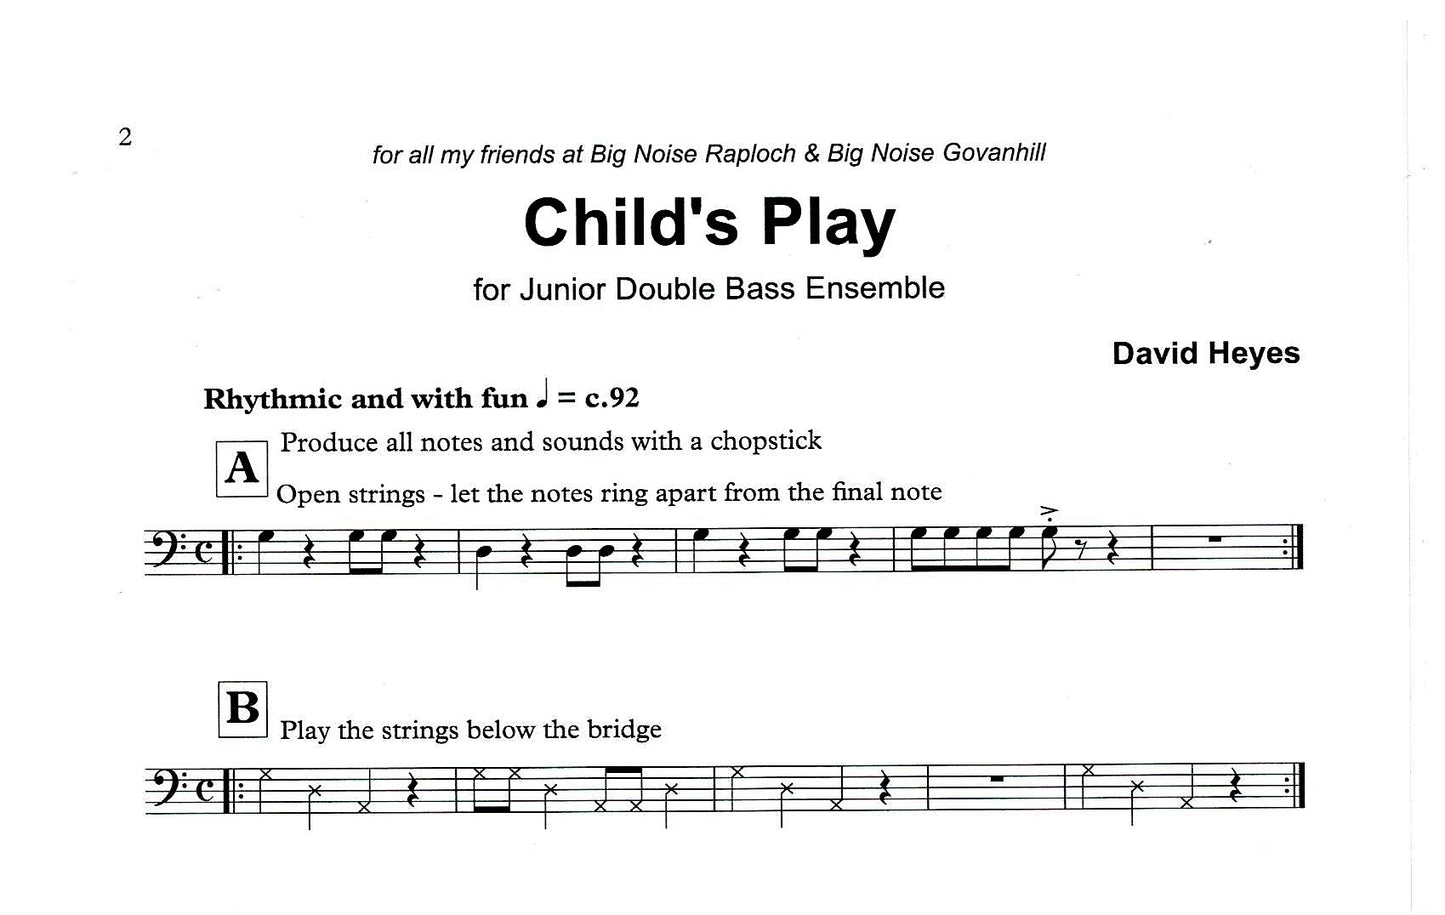 David Heyes: Child's Play for Junior Double Bass Ensemble (any number of players)